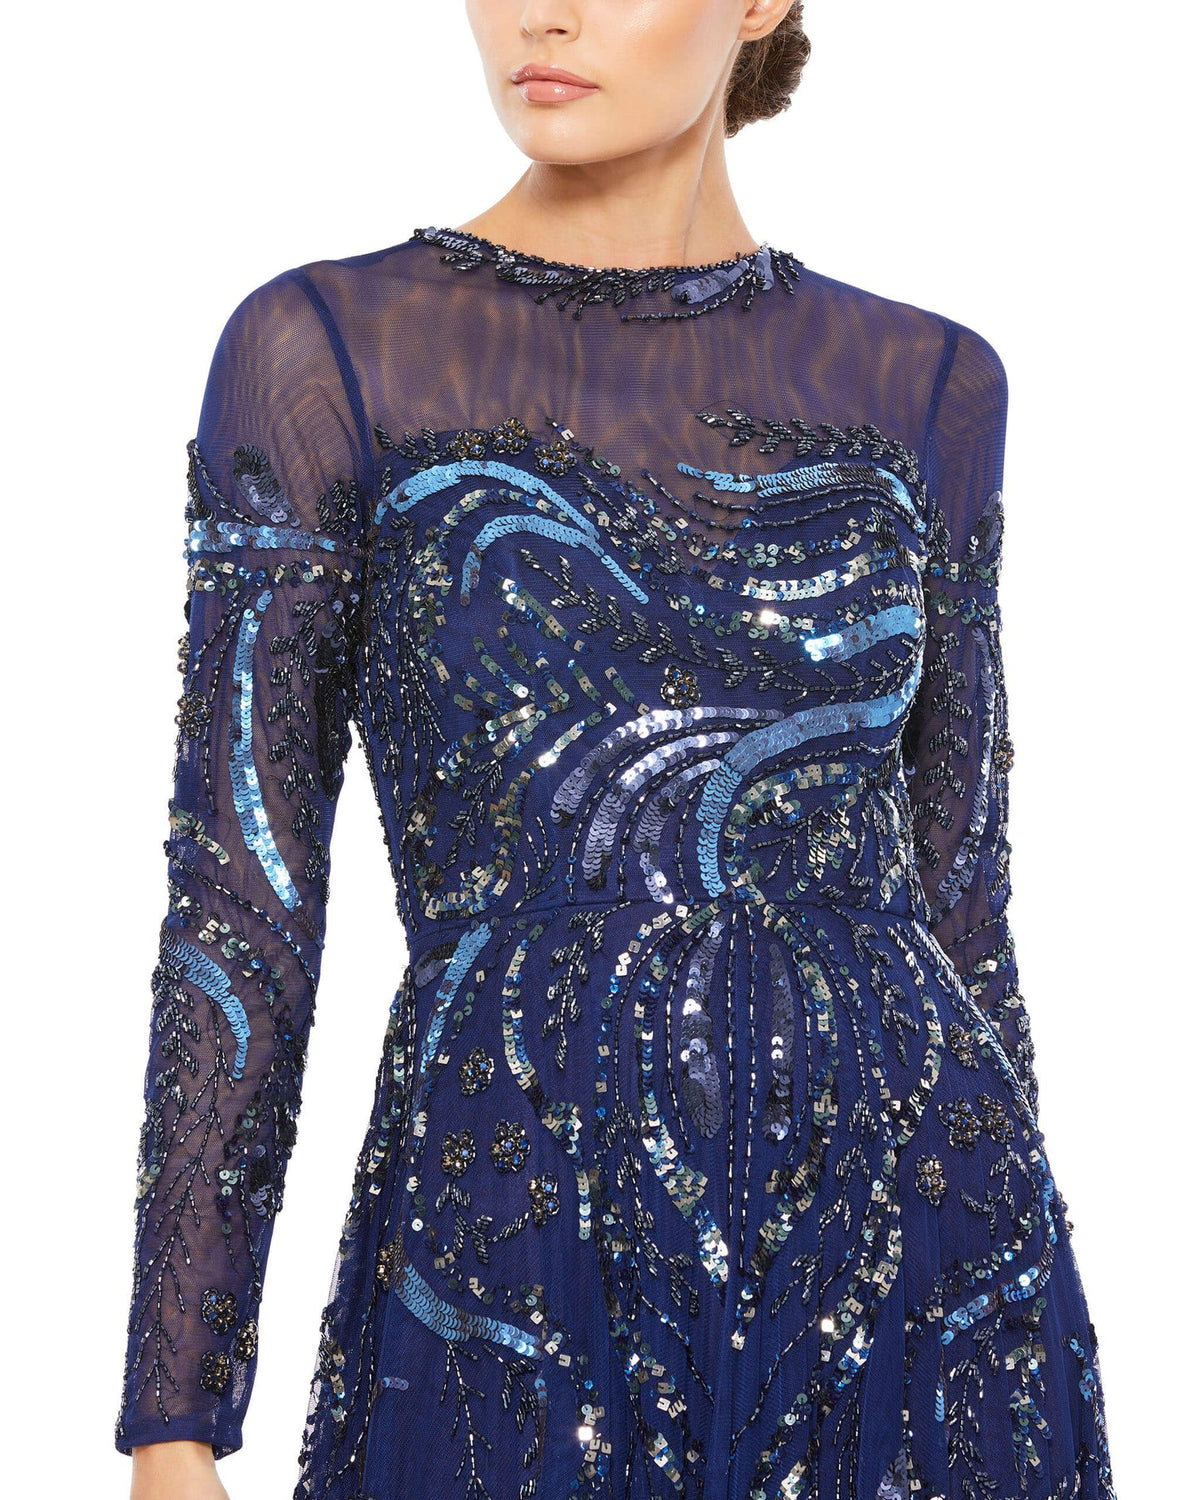 Mac Duggal, LONG SLEEVE EMBELLISHED ILLUSION EVENING GOWN, Style #5217, modest evening gown, midnight navy close up